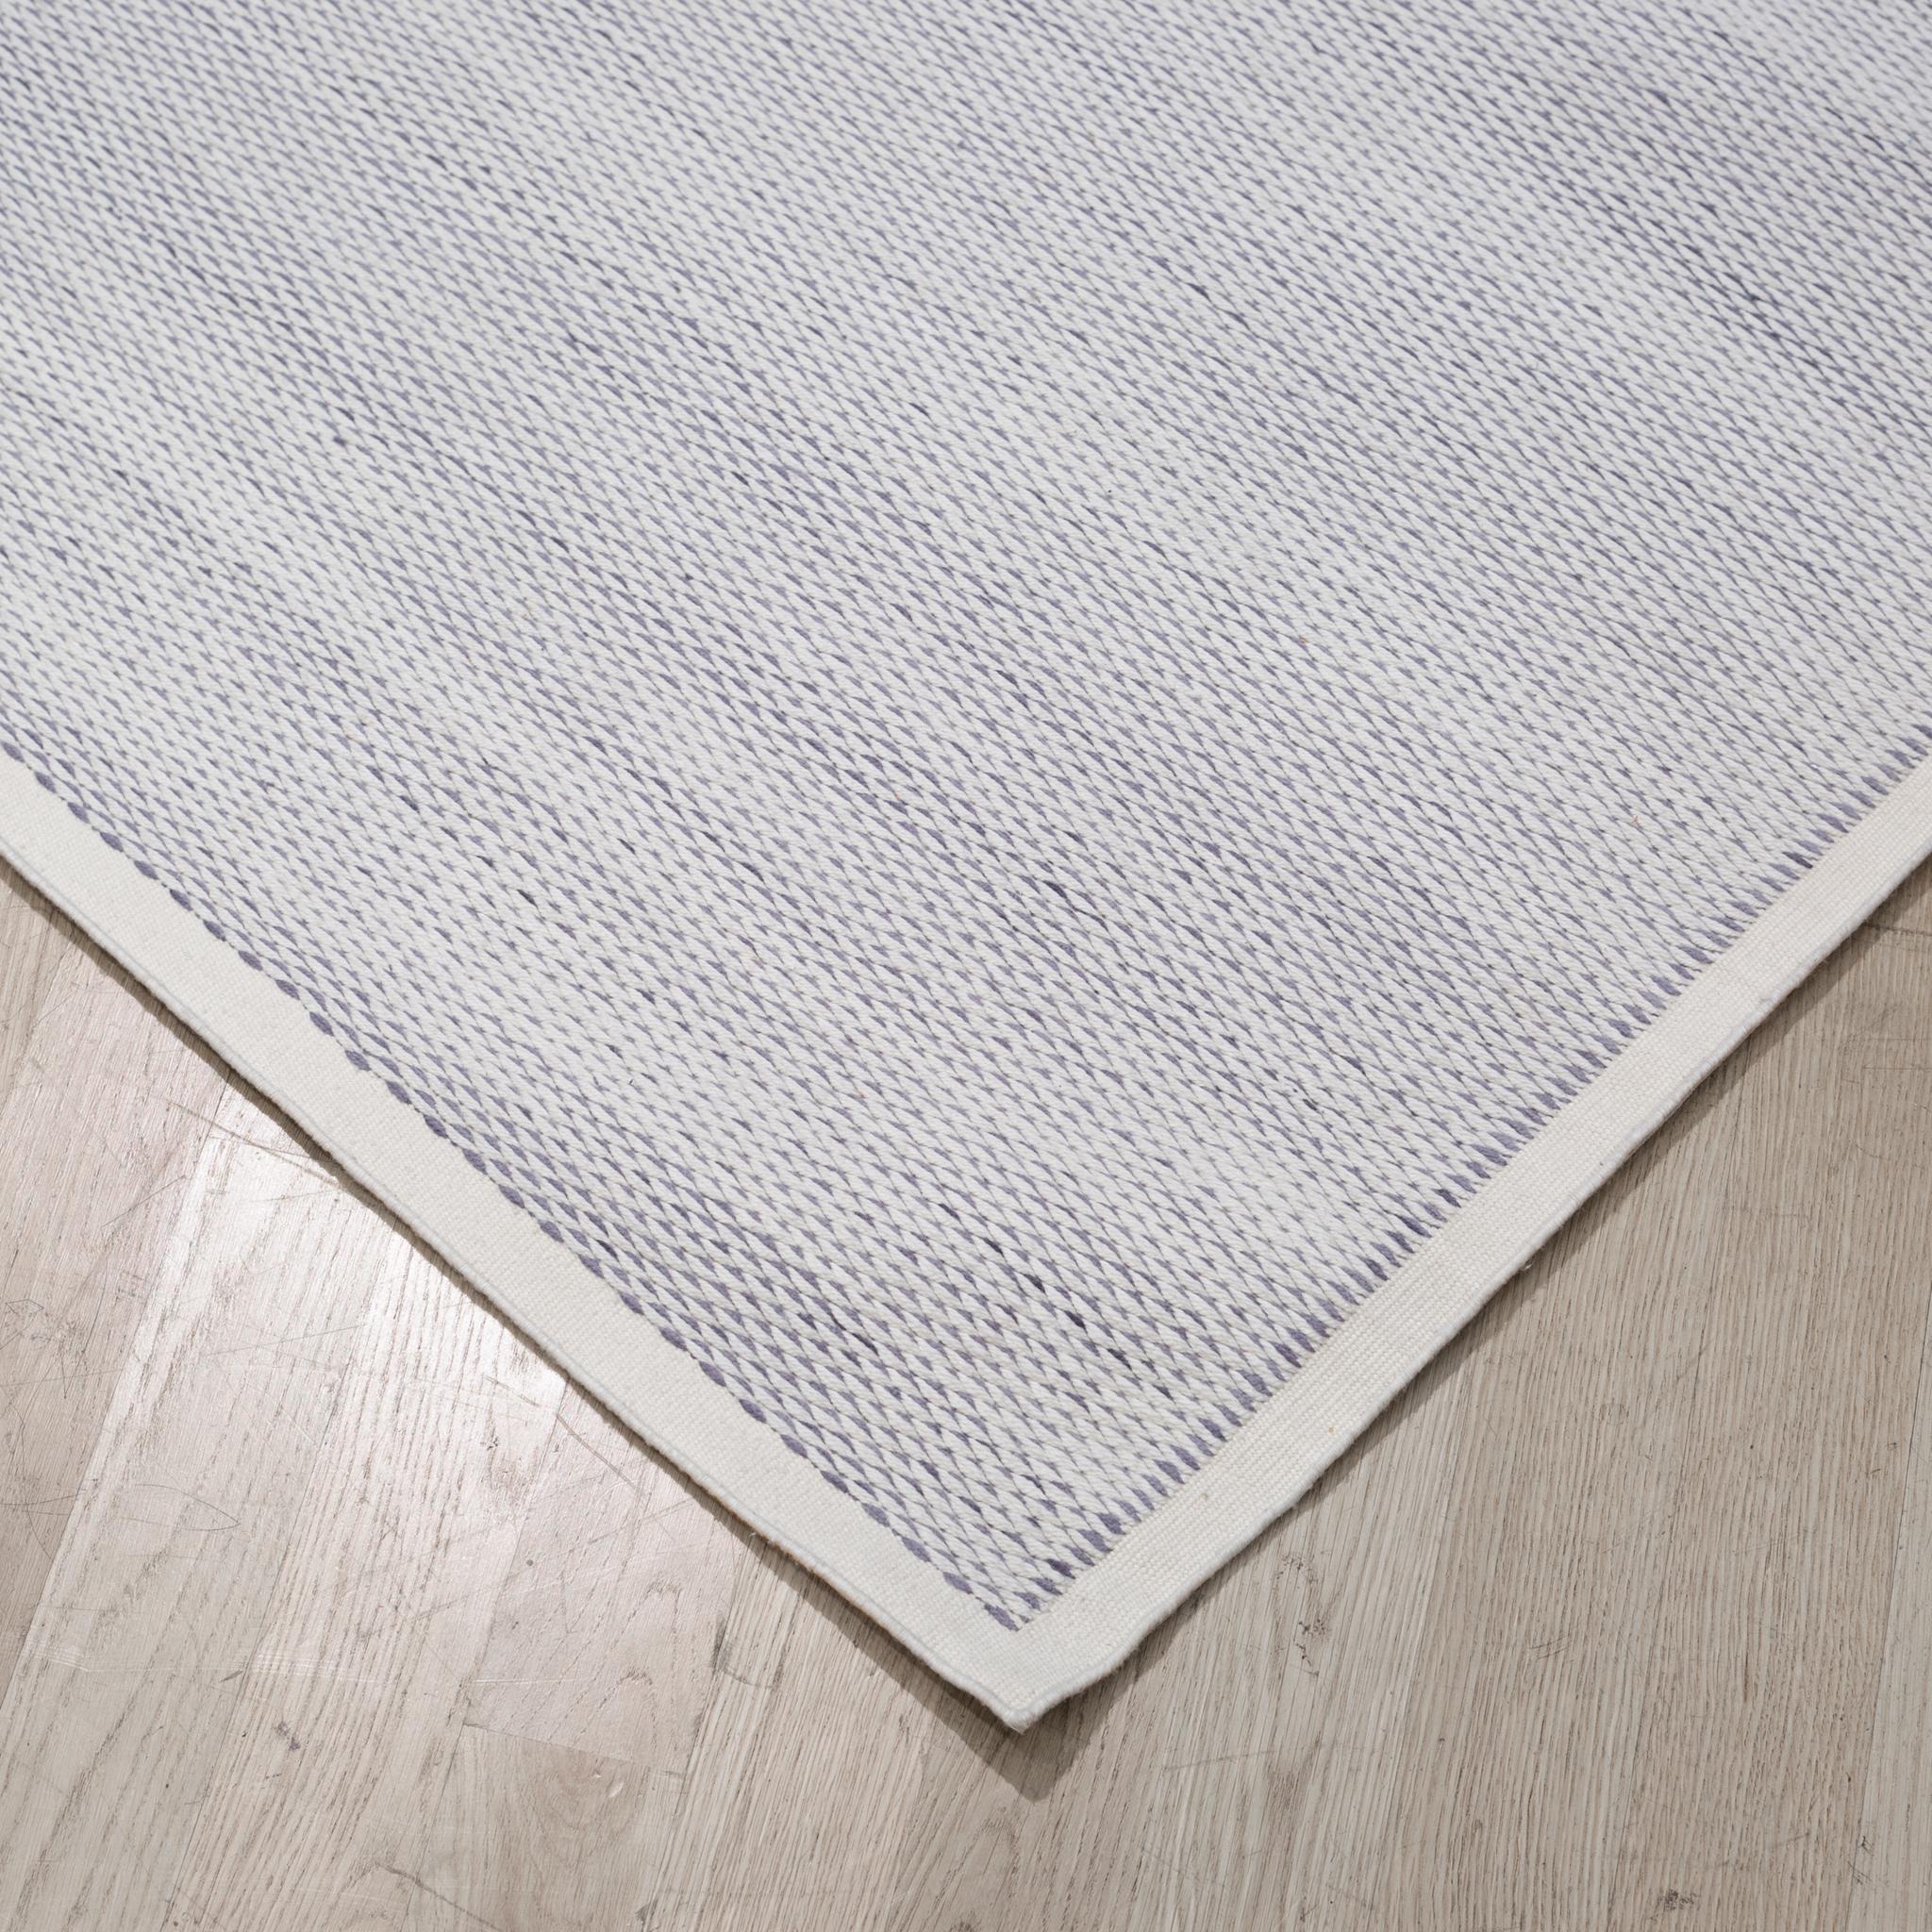 100% Merino Wool Lyxx Area Rug by Fells Andes 9' x 12' For Sale 7